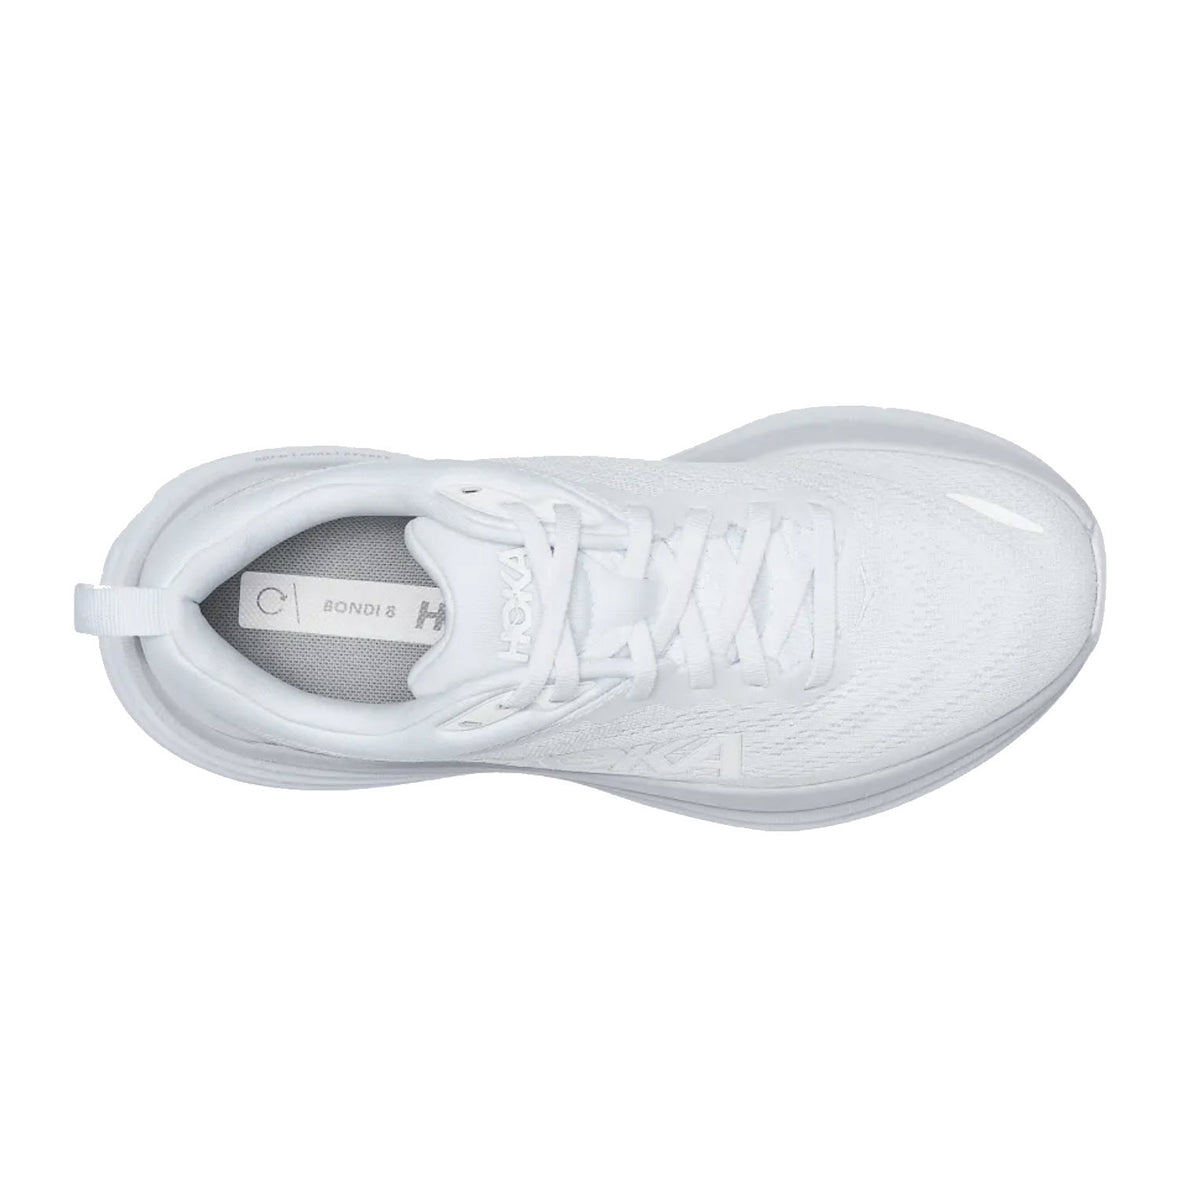 Top view of a white Hoka Bondi 8 sneaker showing the round toe profile, Hoka brand names on the insole and tongue, with visible lace loops.